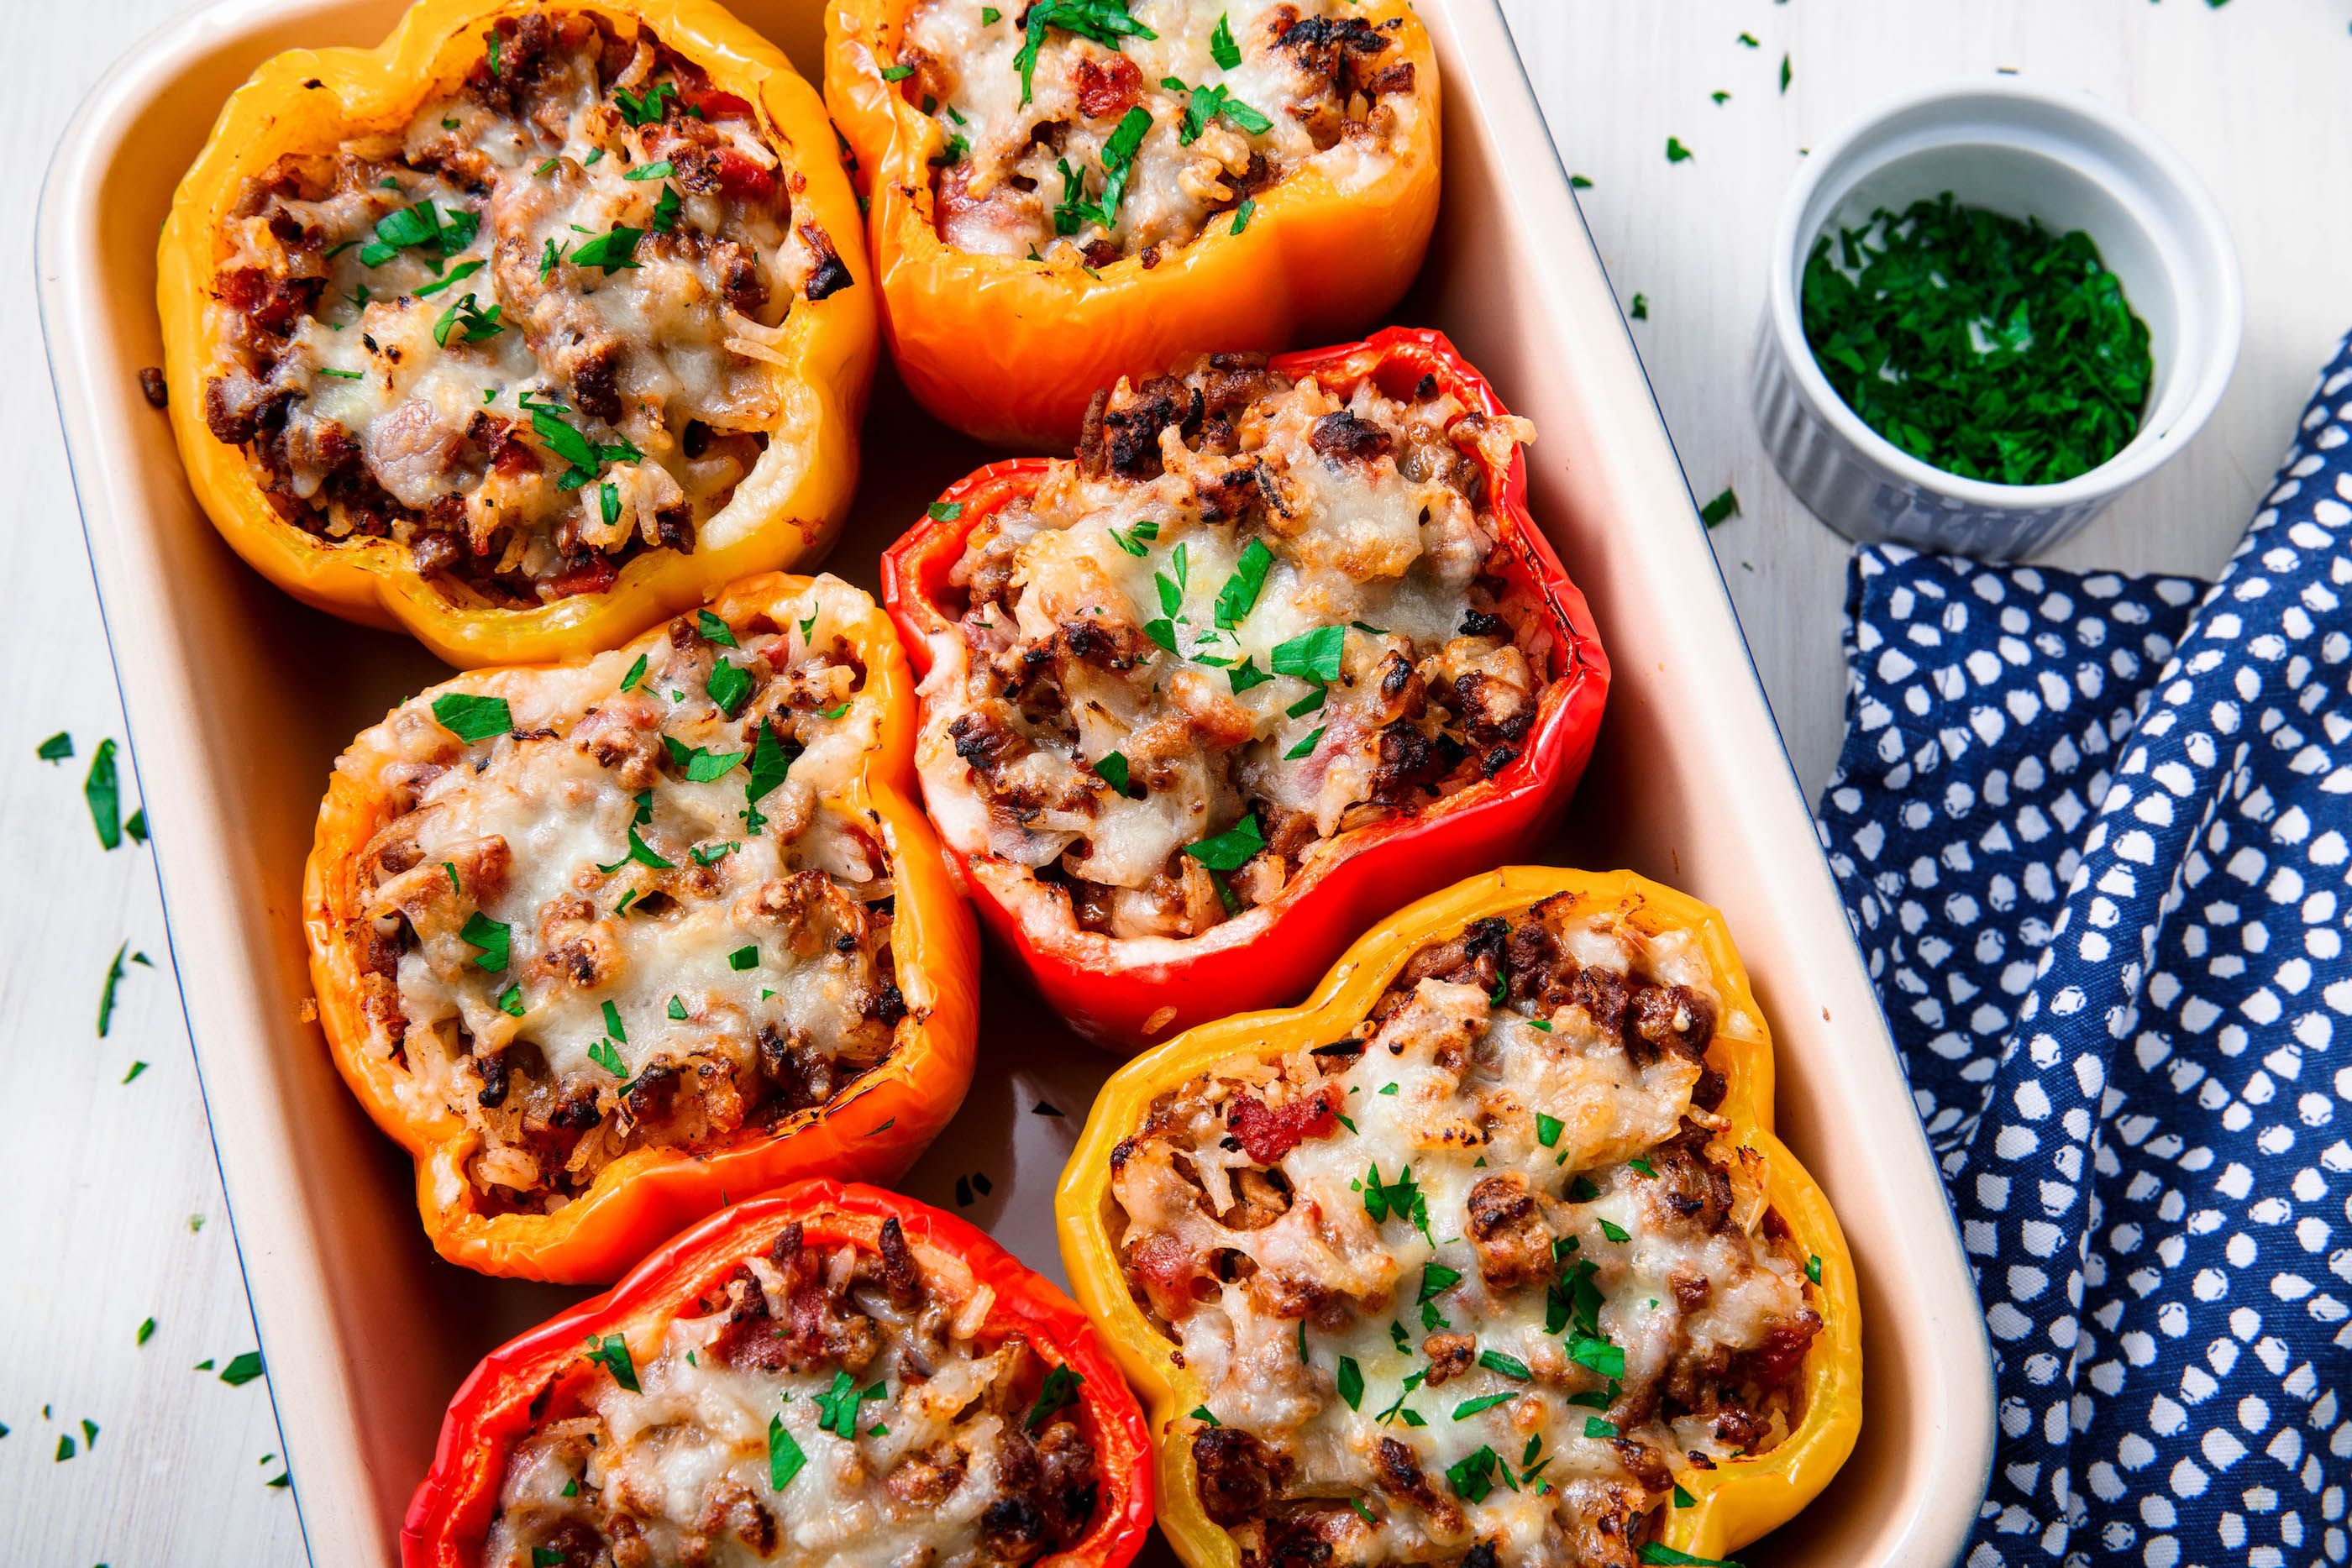 Best Classic Stuffed Peppers Recipe How To Make Classic Stuffed Peppers